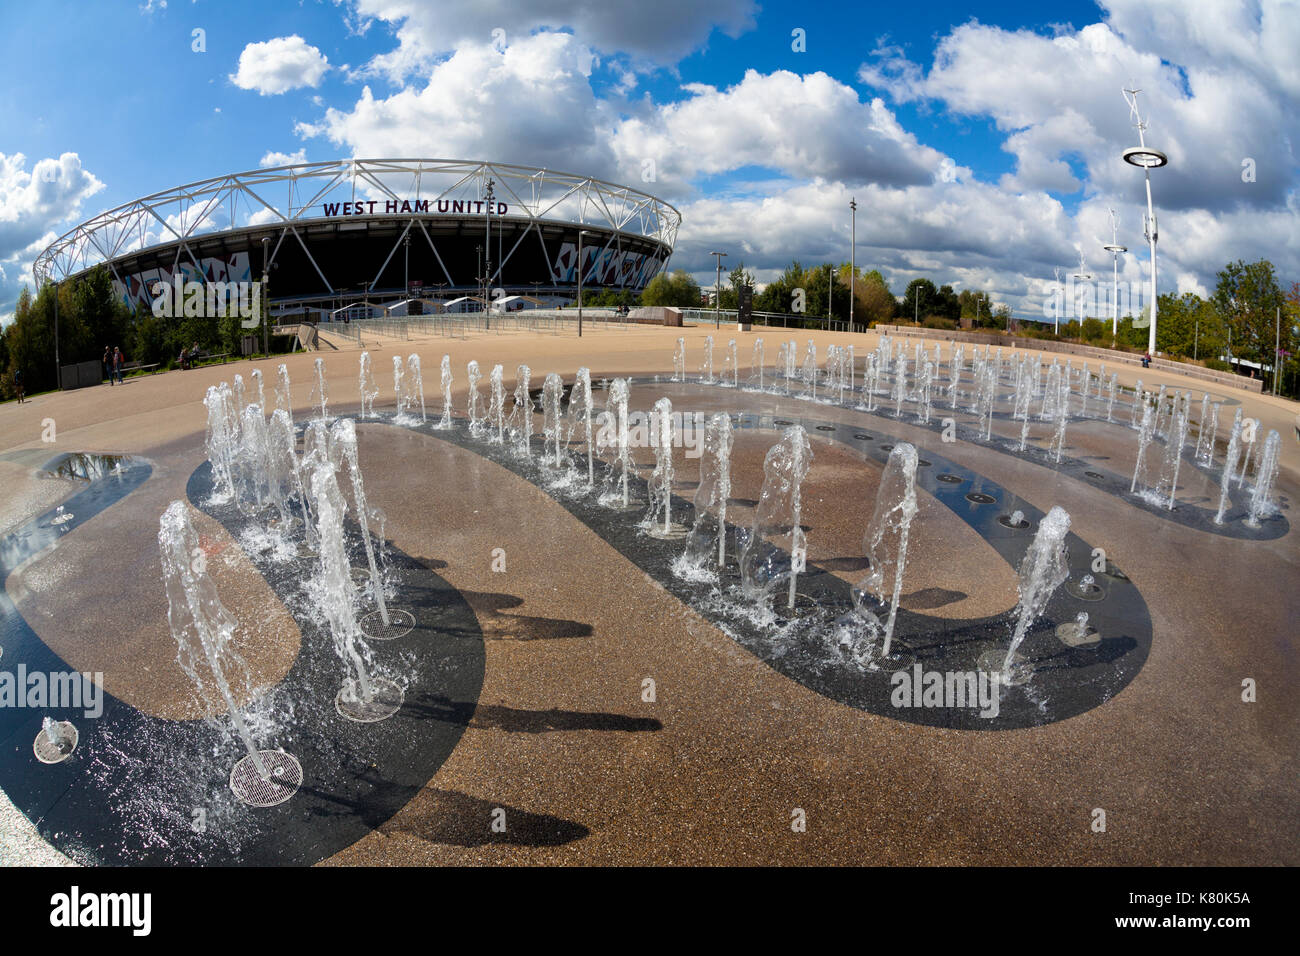 The London Stadium at the Queen Elizabeth Olympic Park branded as the home of West Ham United Football Club, London, UK Stock Photo